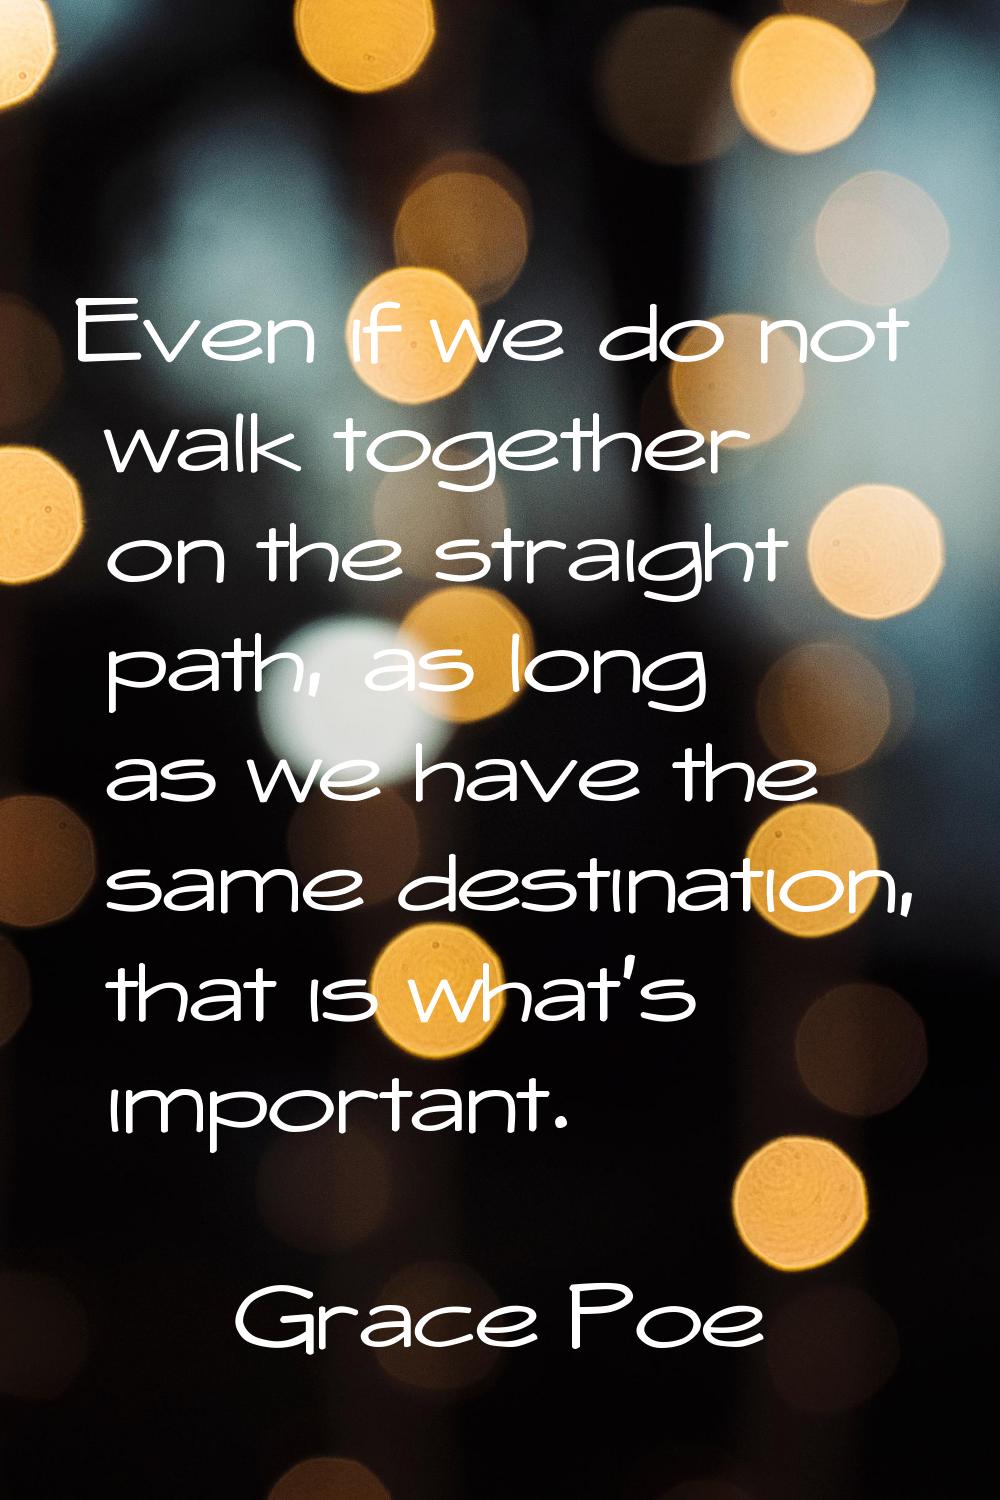 Even if we do not walk together on the straight path, as long as we have the same destination, that